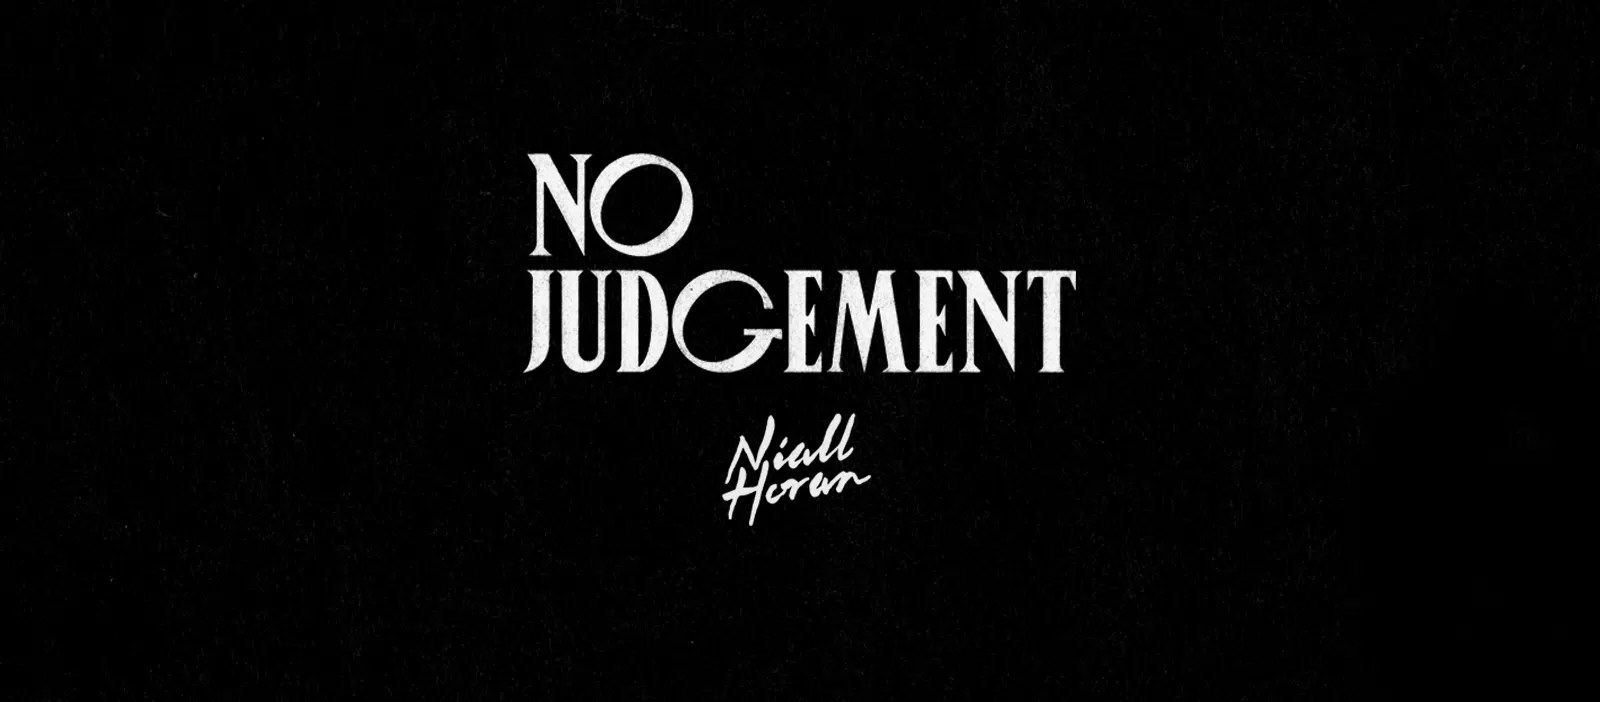 Niall Horan Announces New Single "No Judgement" Out Friday